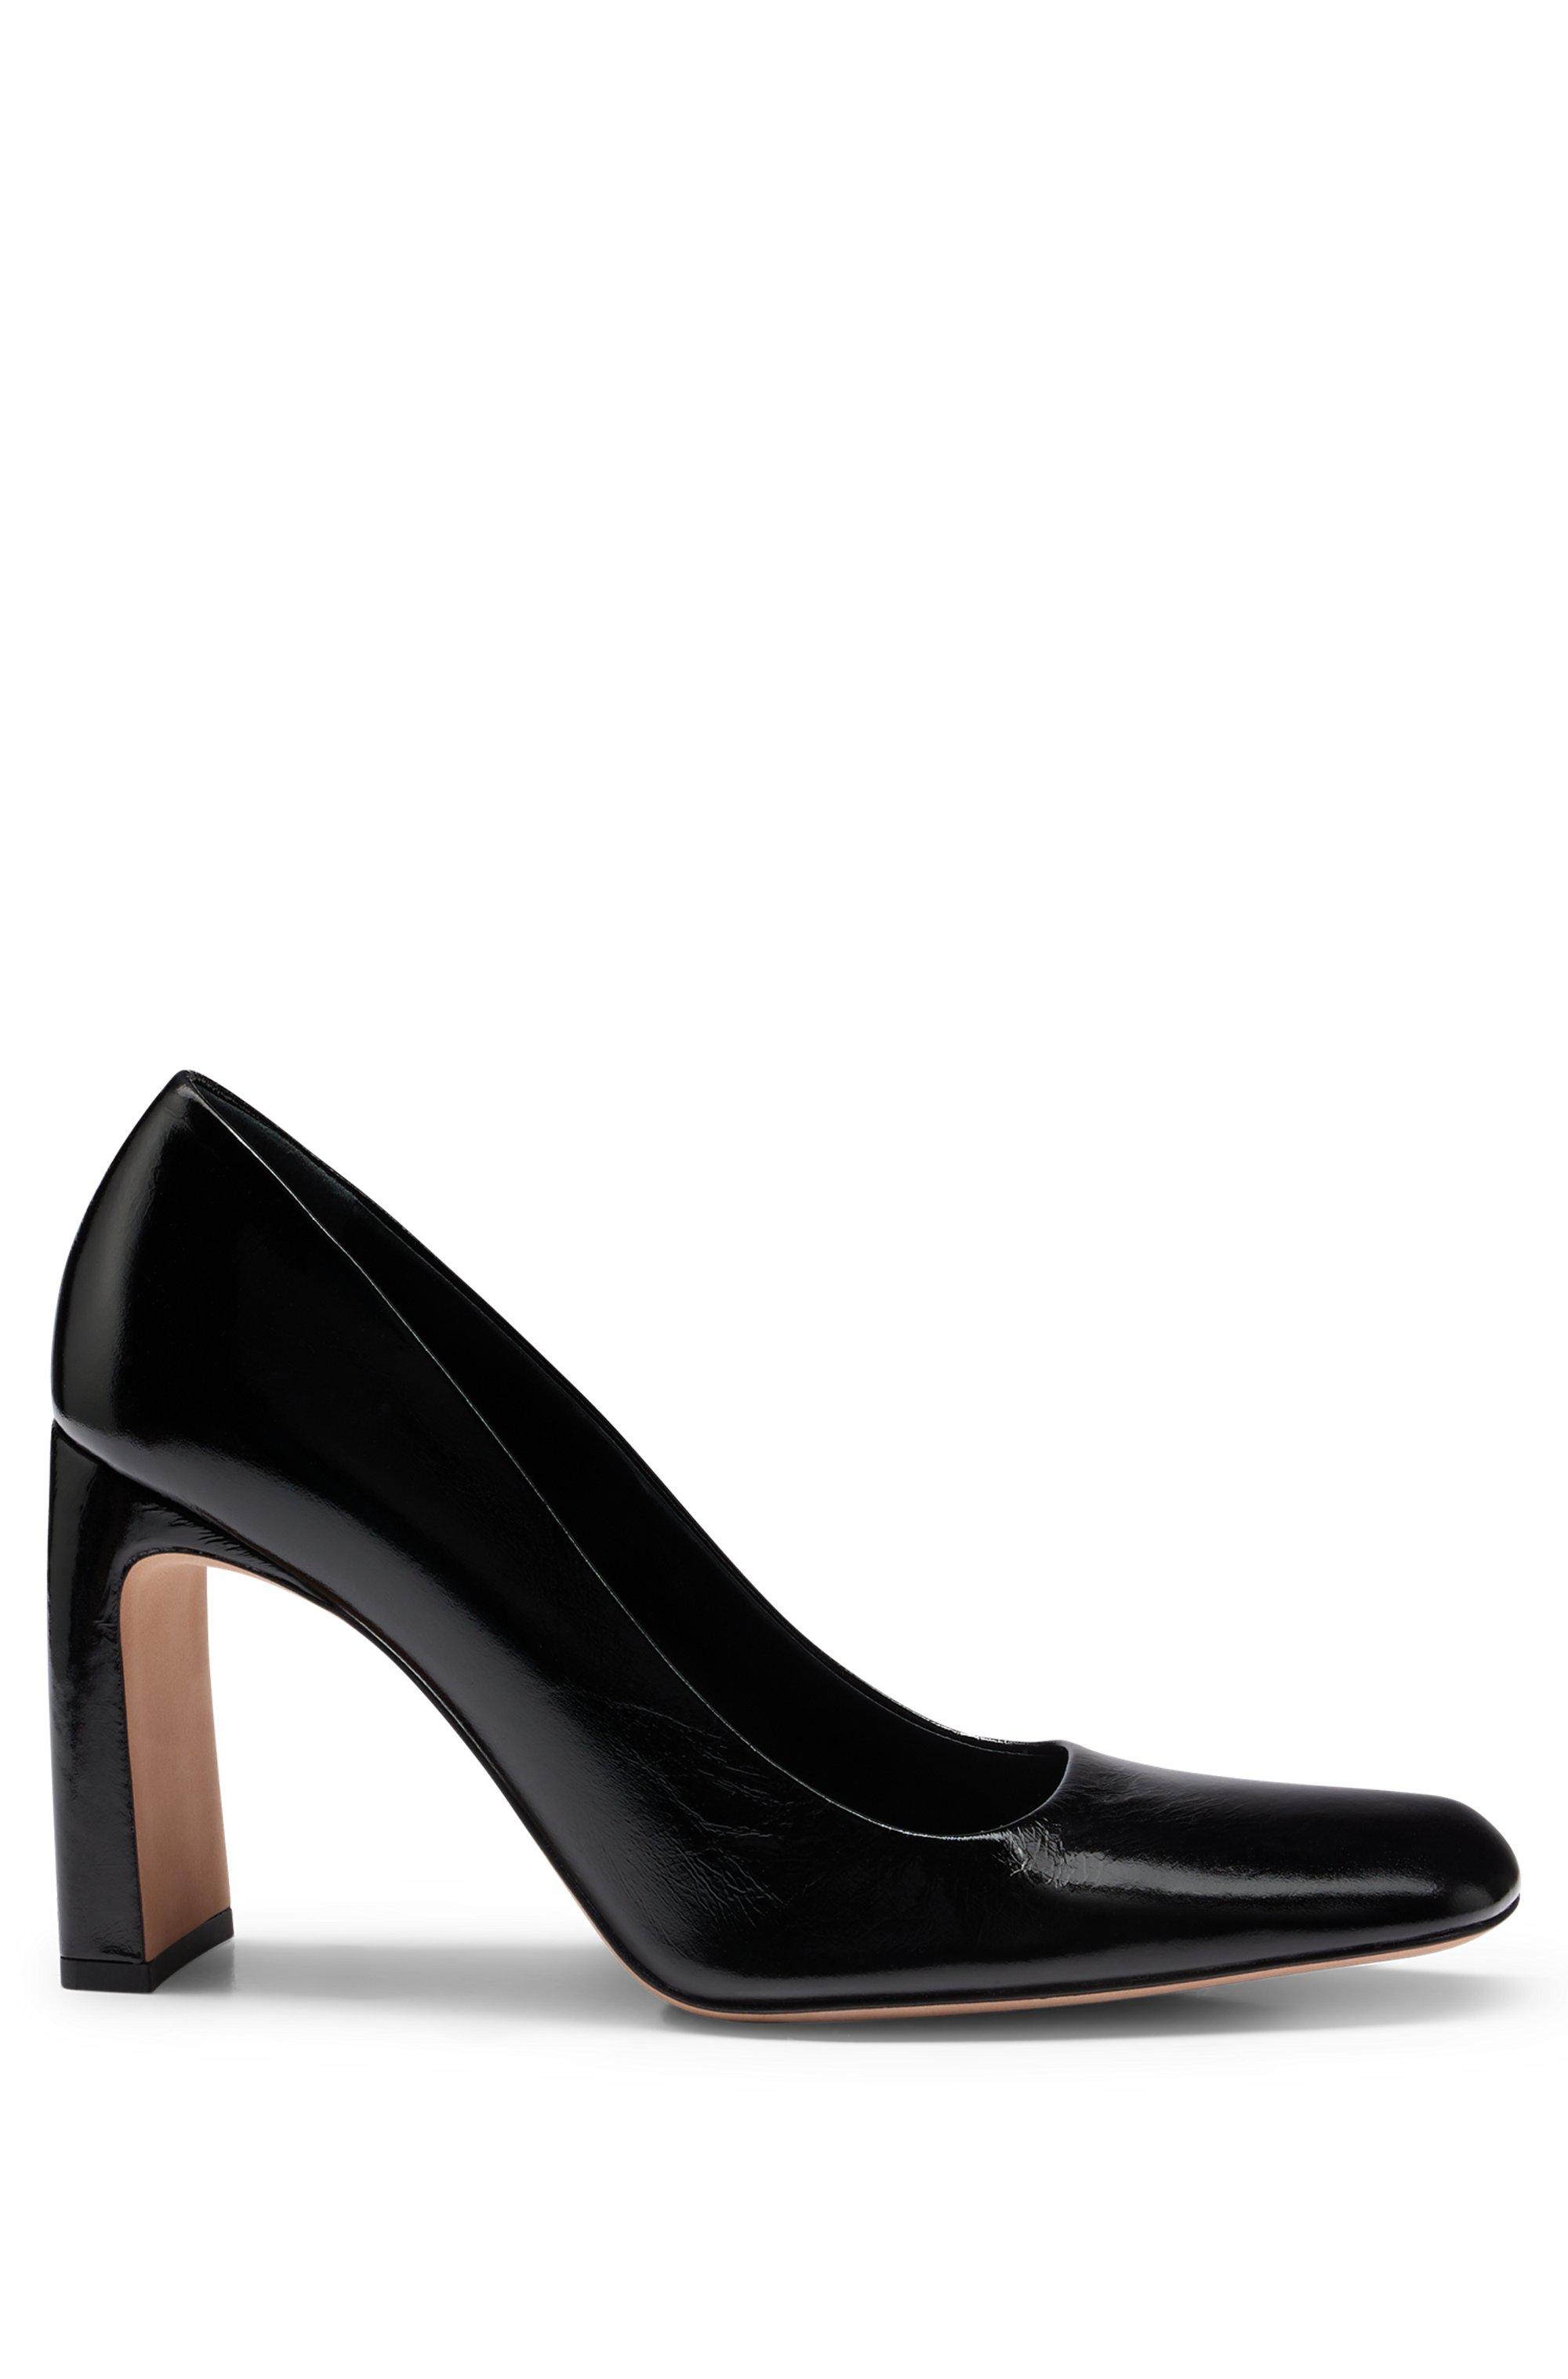 BOSS by HUGO BOSS Leather Pumps With 9cm Block Heel in Black | Lyst